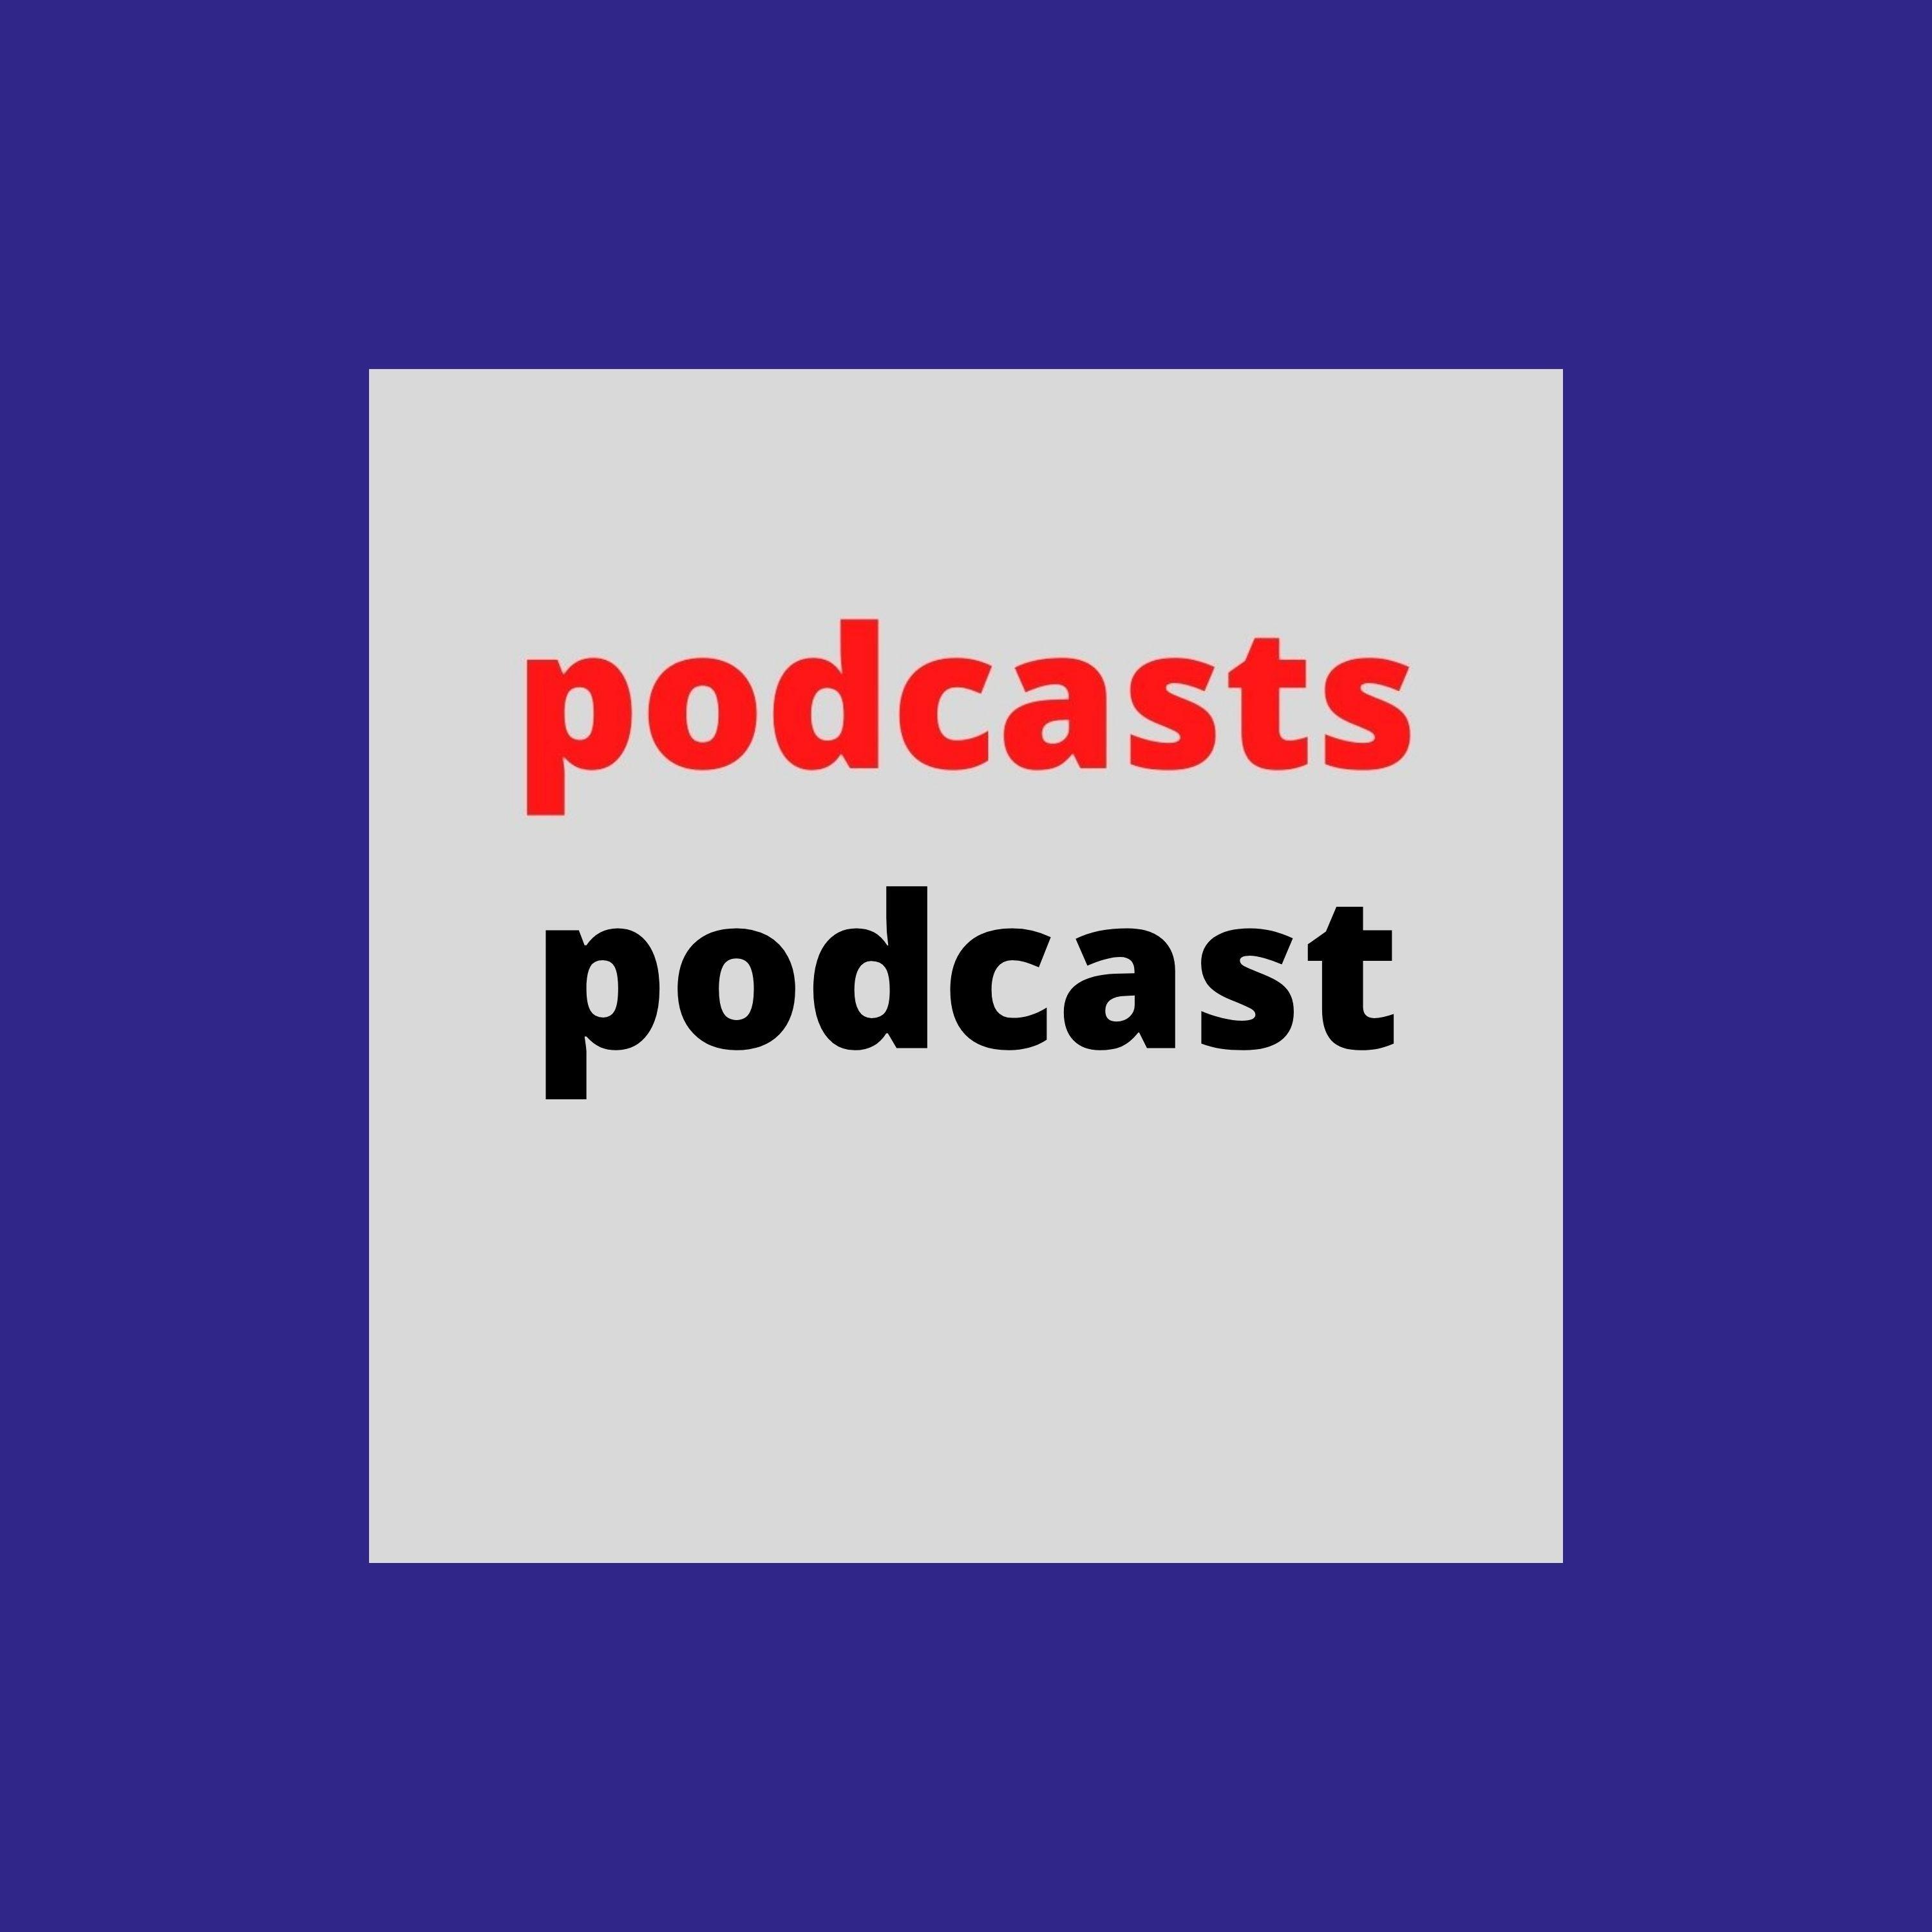 podcasts podcast